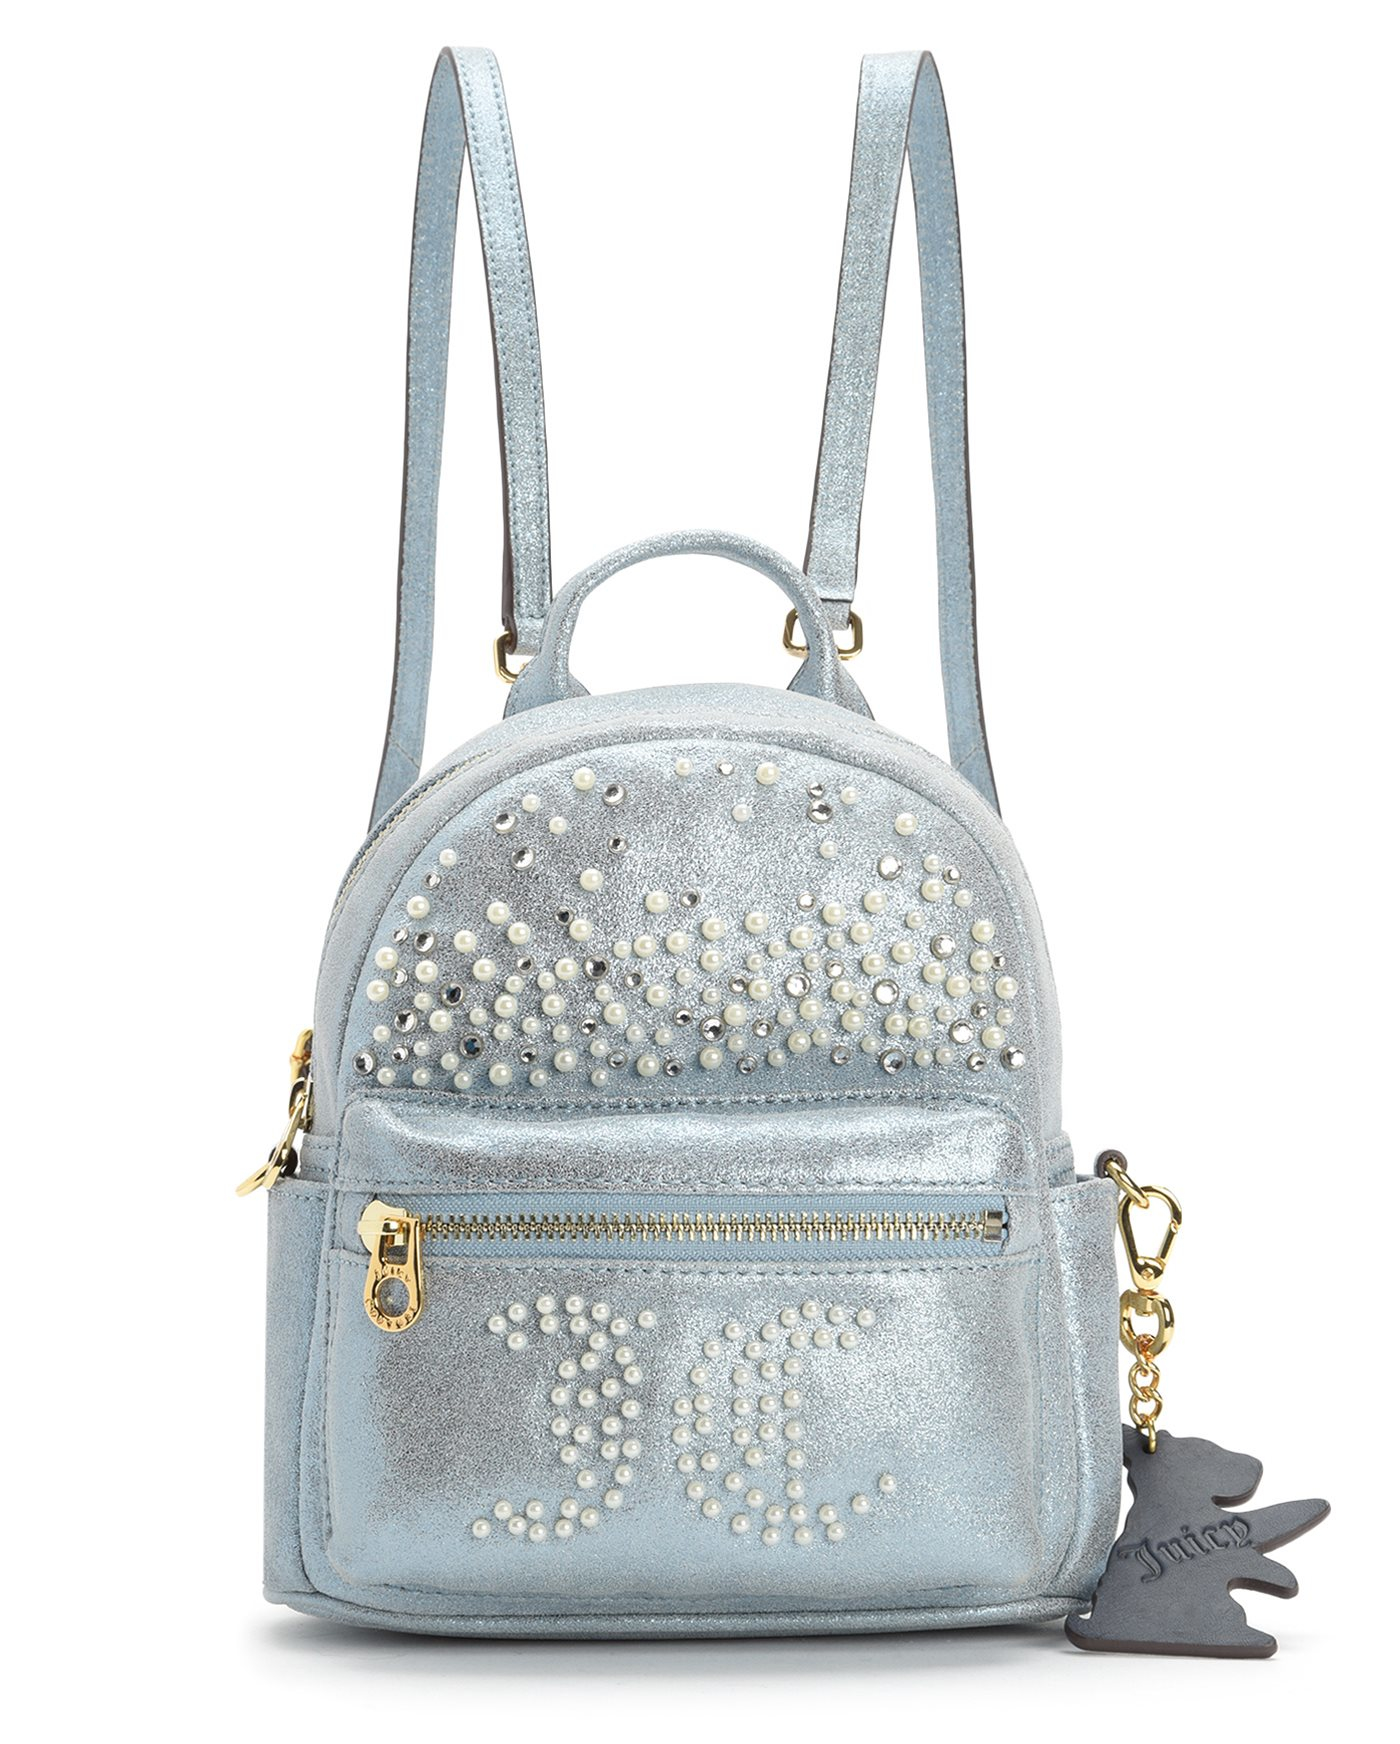 Juicy couture Metallic Leather Convertible Mini Backpack in Blue | Lyst